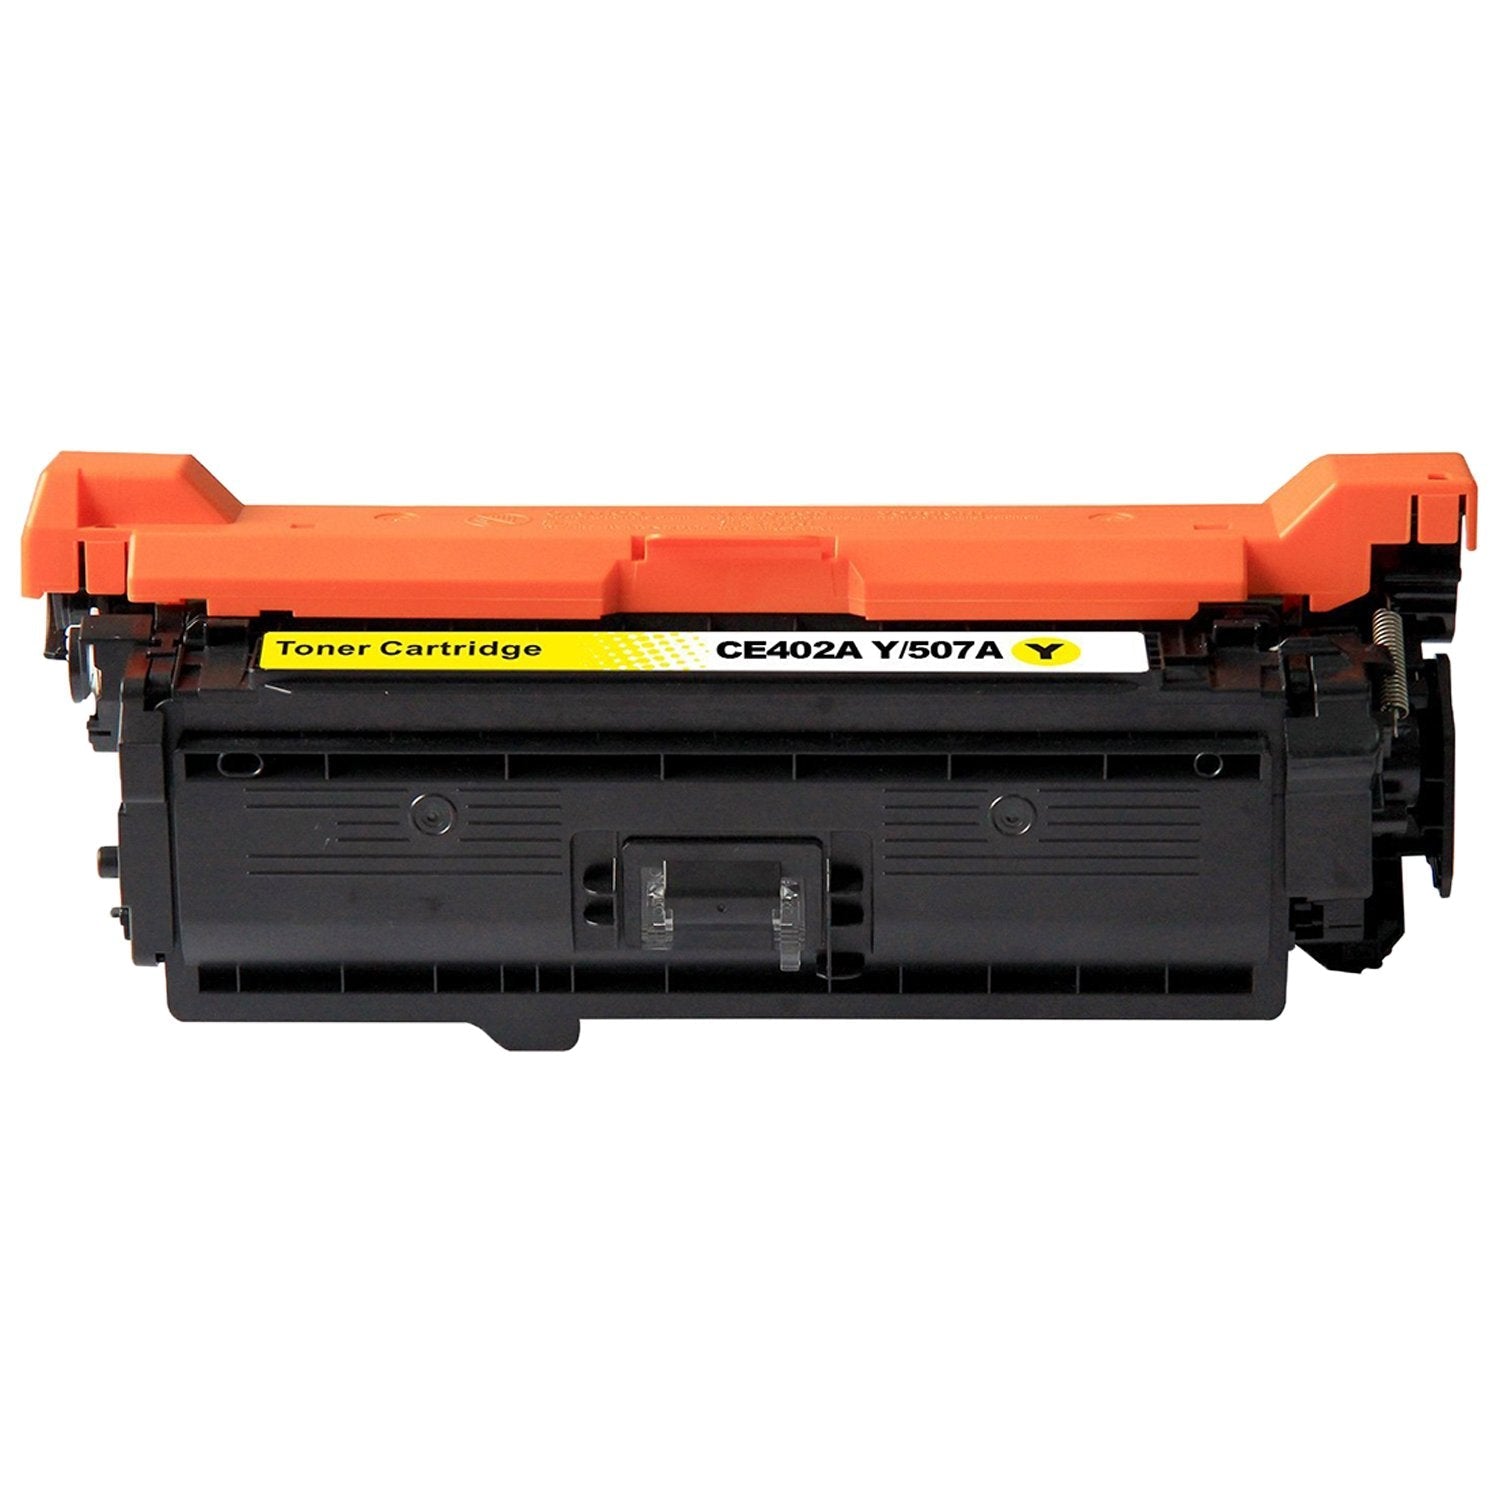 Absolute Toner Compatible CE402A HP 507A Yellow Toner Cartridge | Absolute Toner HP Toner Cartridges